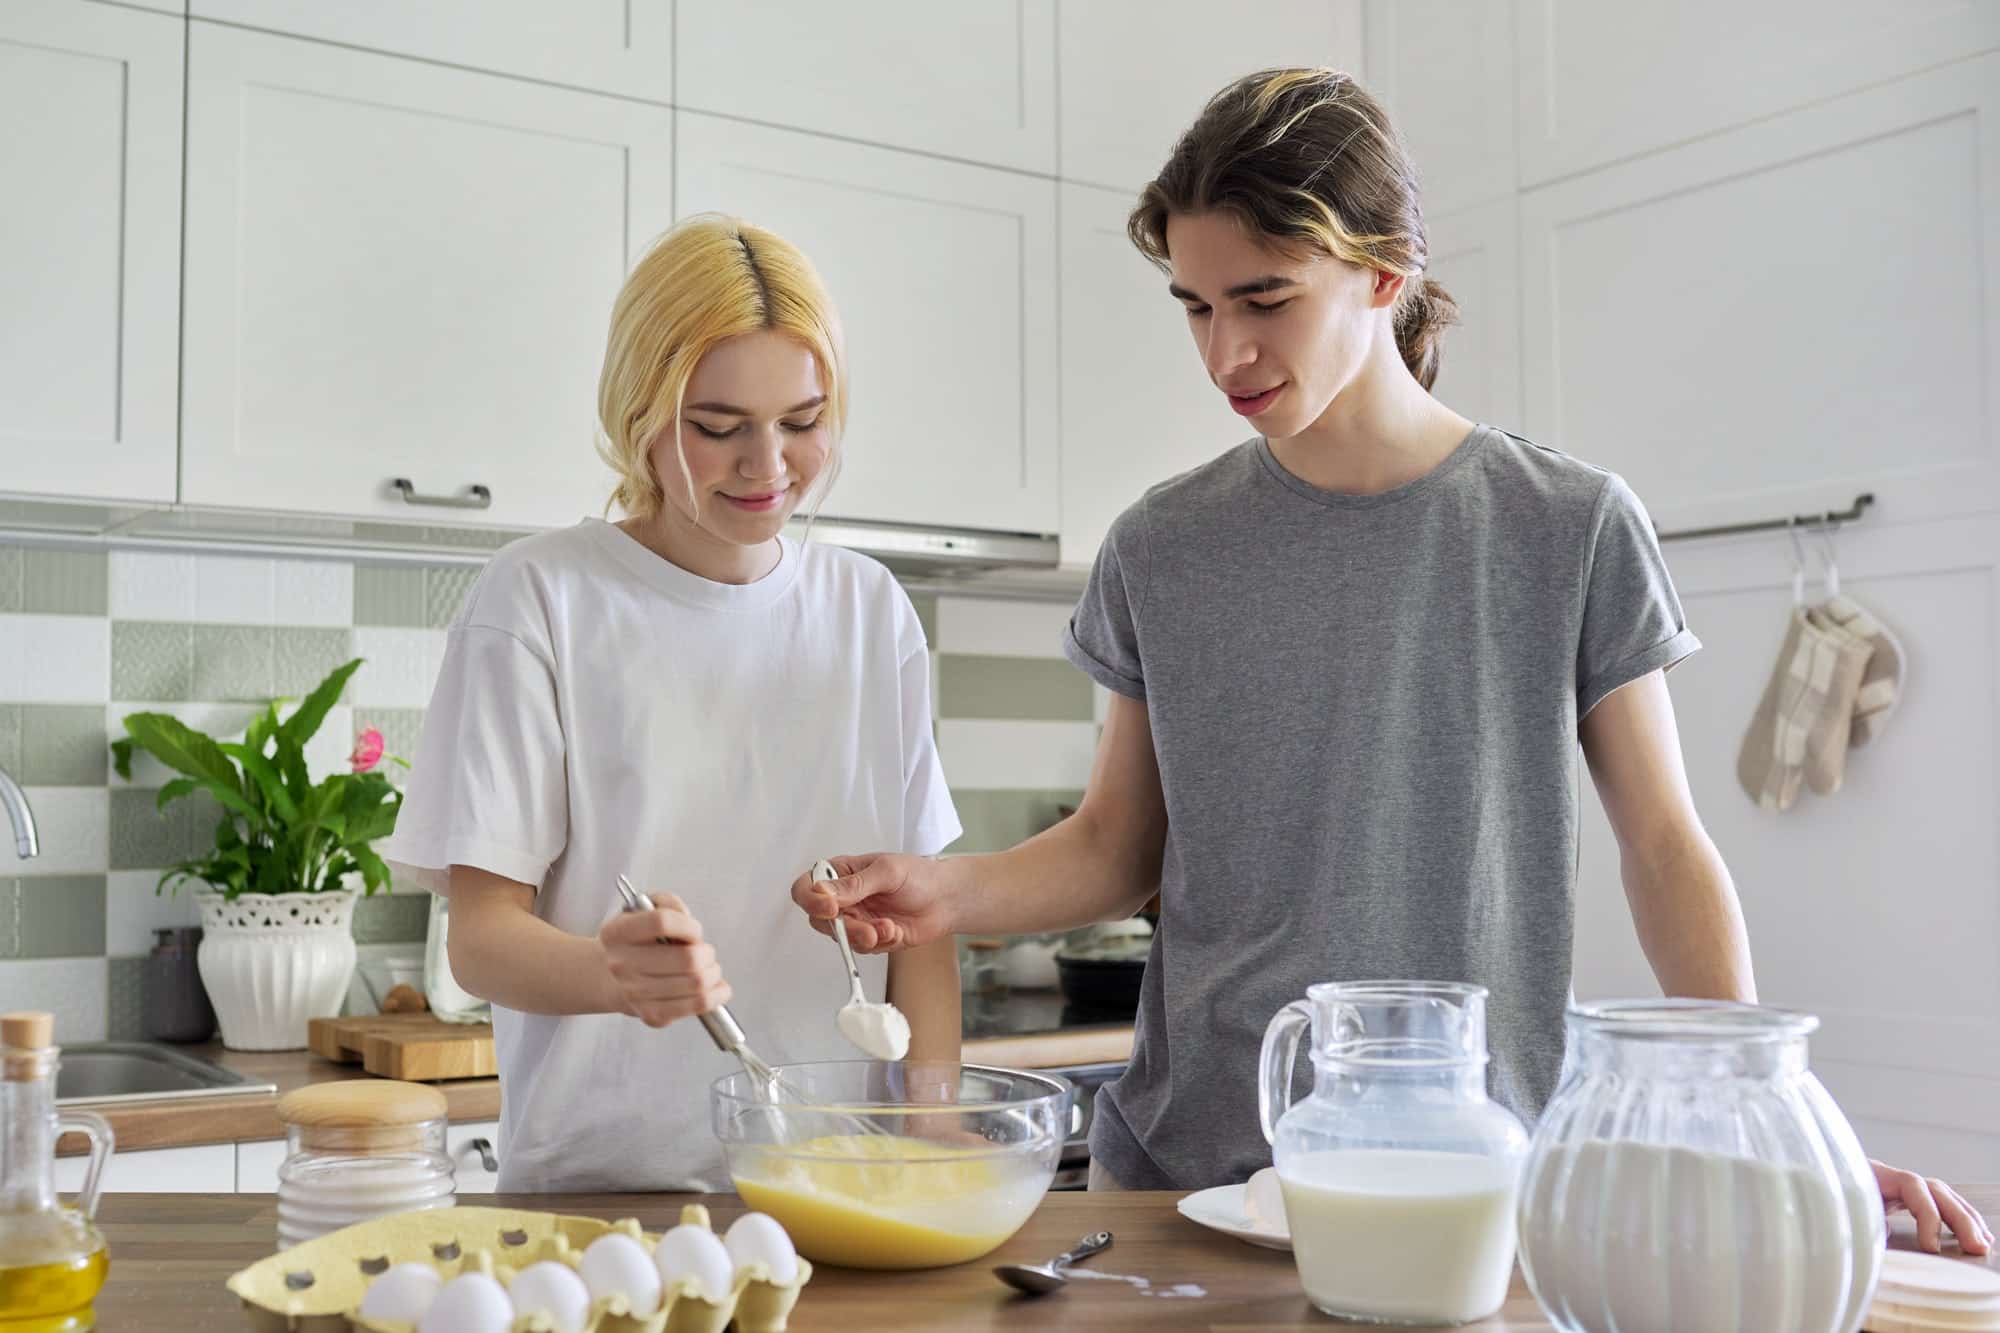 Teenagers: a guy and girl cooking pancakes in kitchen together